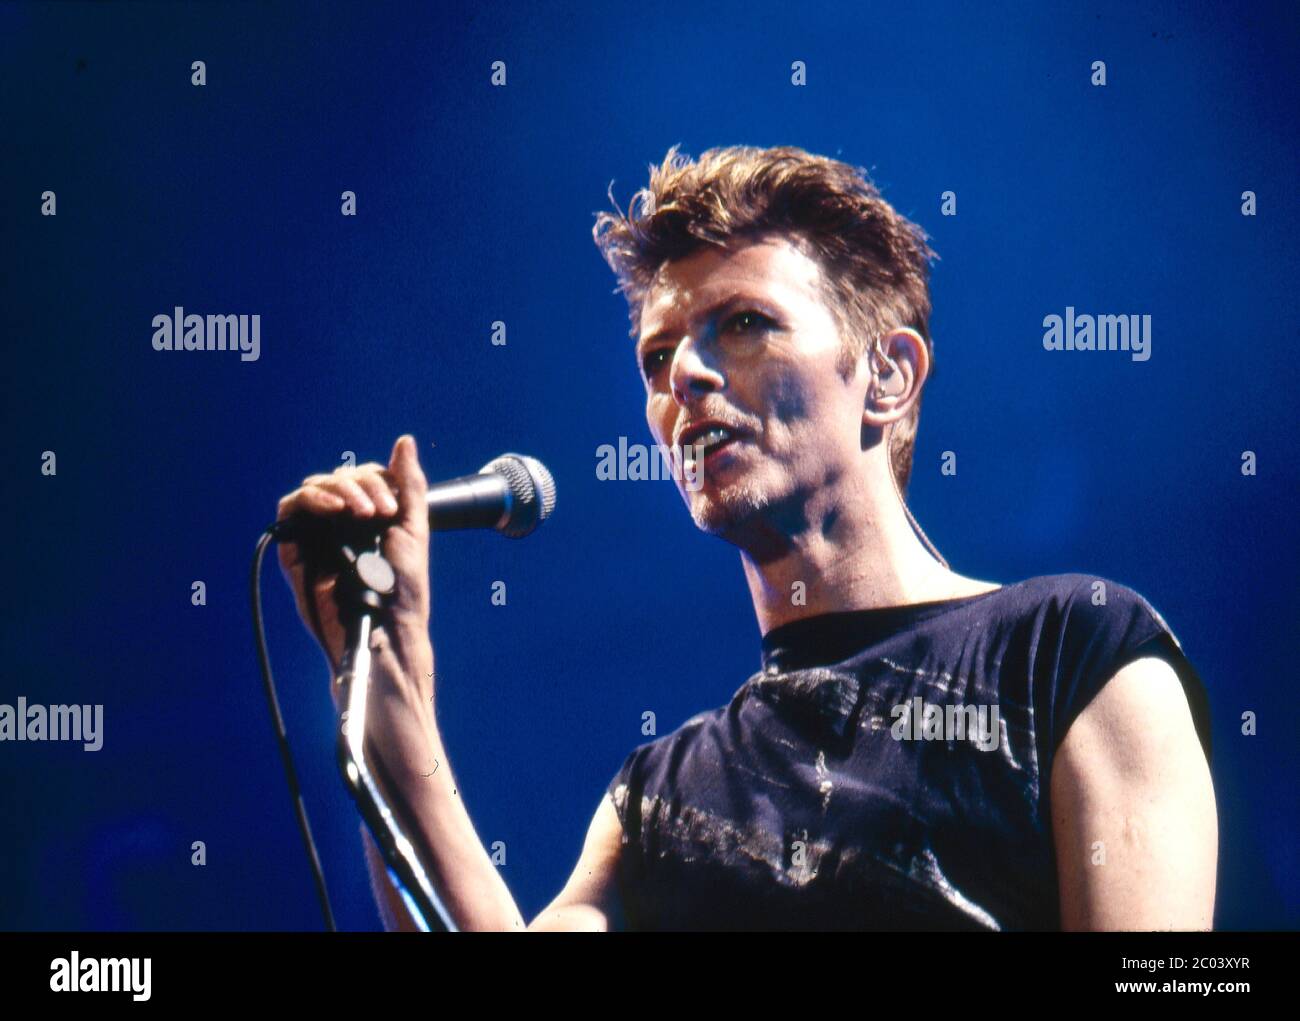 David Bowie in concert at Wembley Arena,London 17th November 1995 Stock Photo